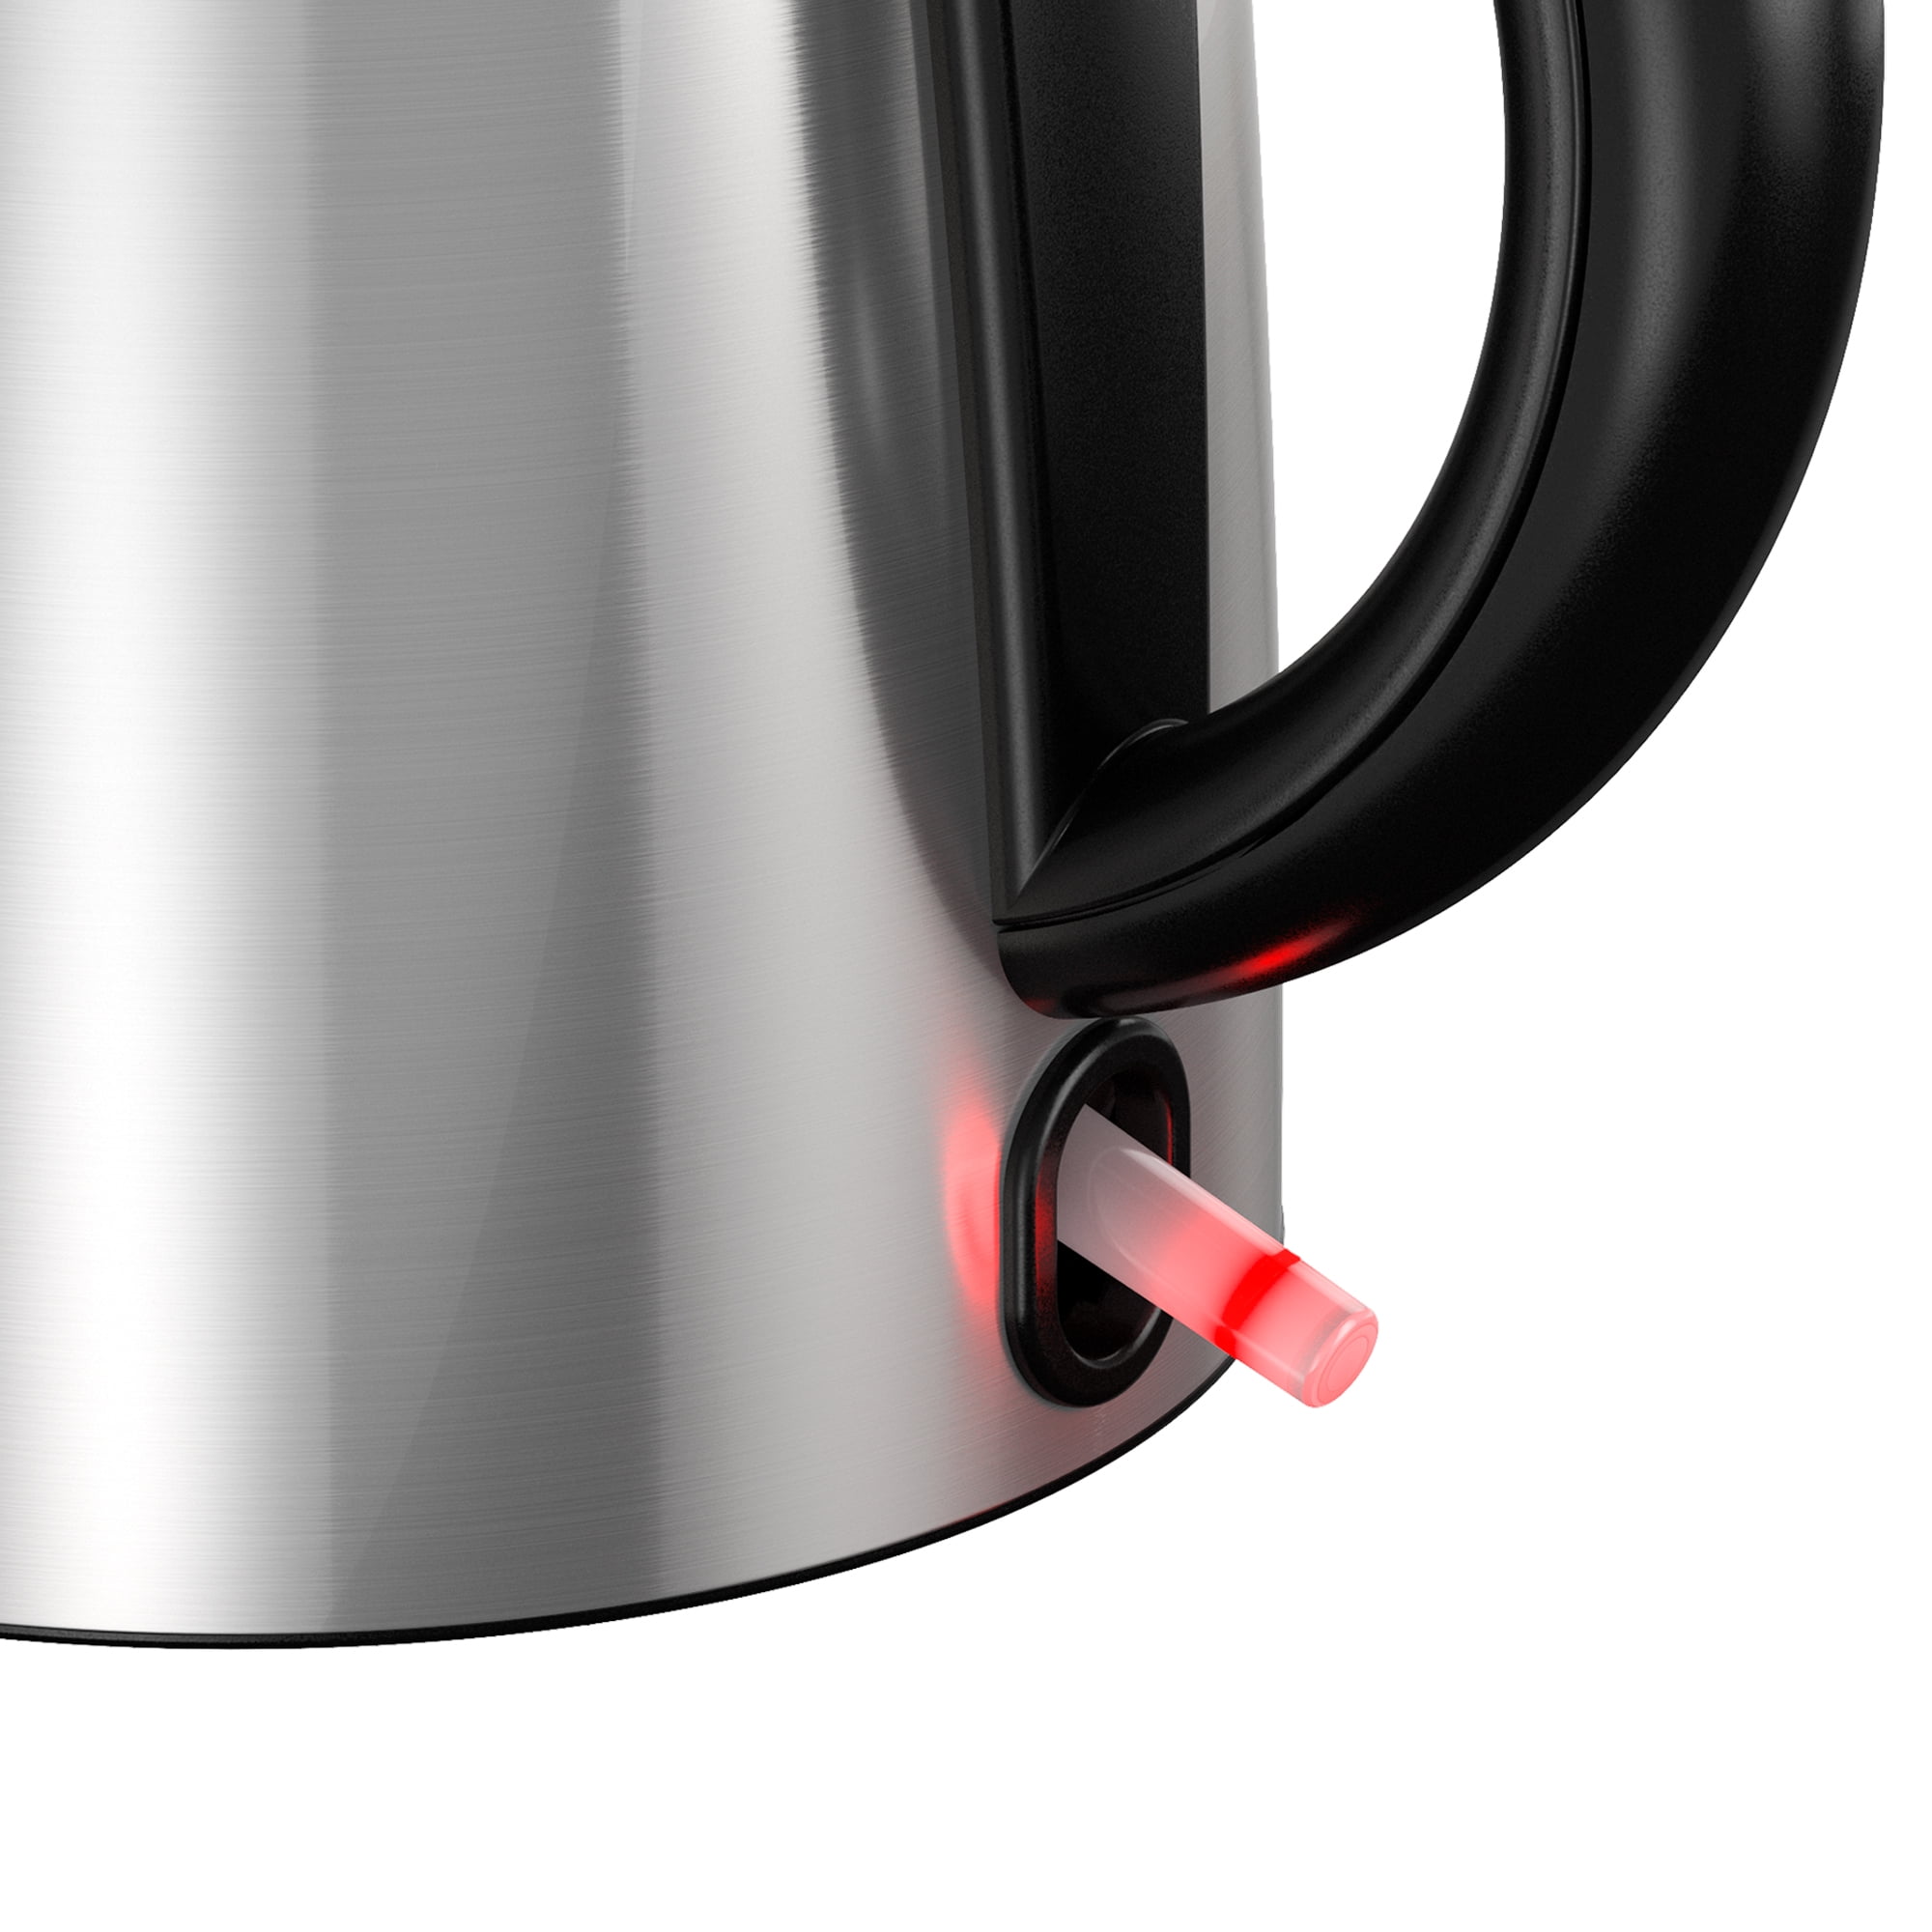 BLACK & DECKER STAINLESS STEEL ELECTRIC CORDLESS KETTLE RED  CK1500R/BRAND NEW